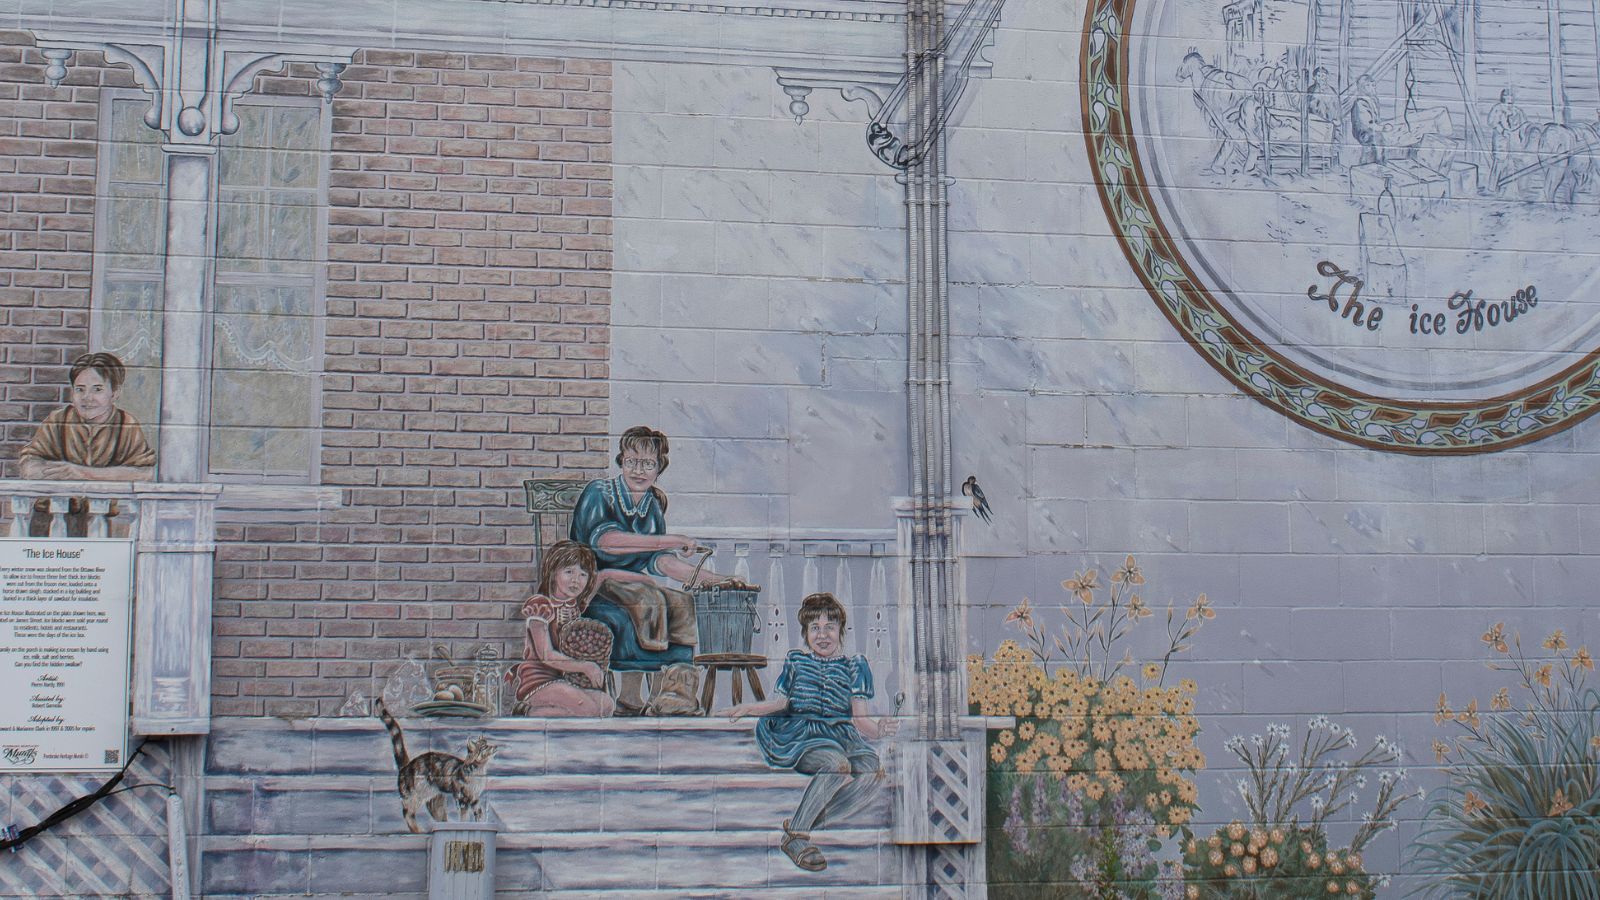 Photo of the Ice House mural.